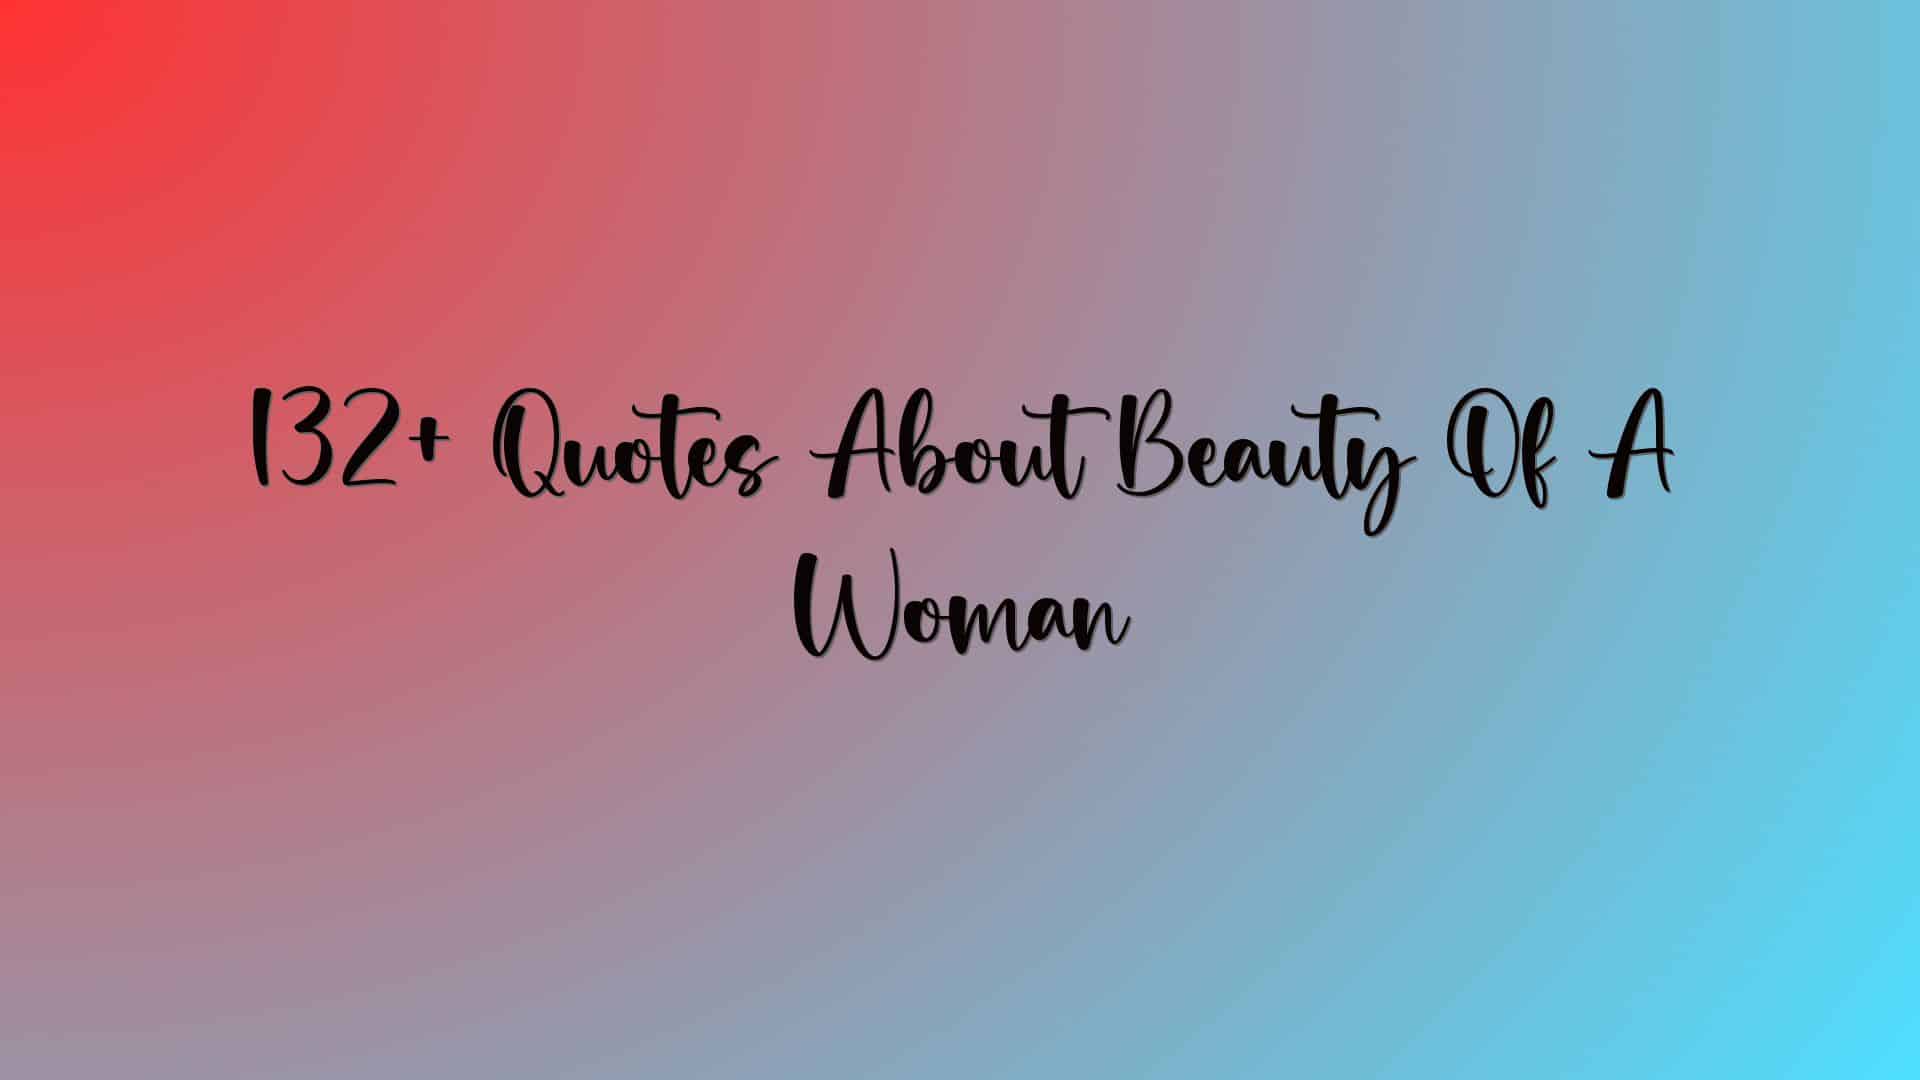 132+ Quotes About Beauty Of A Woman